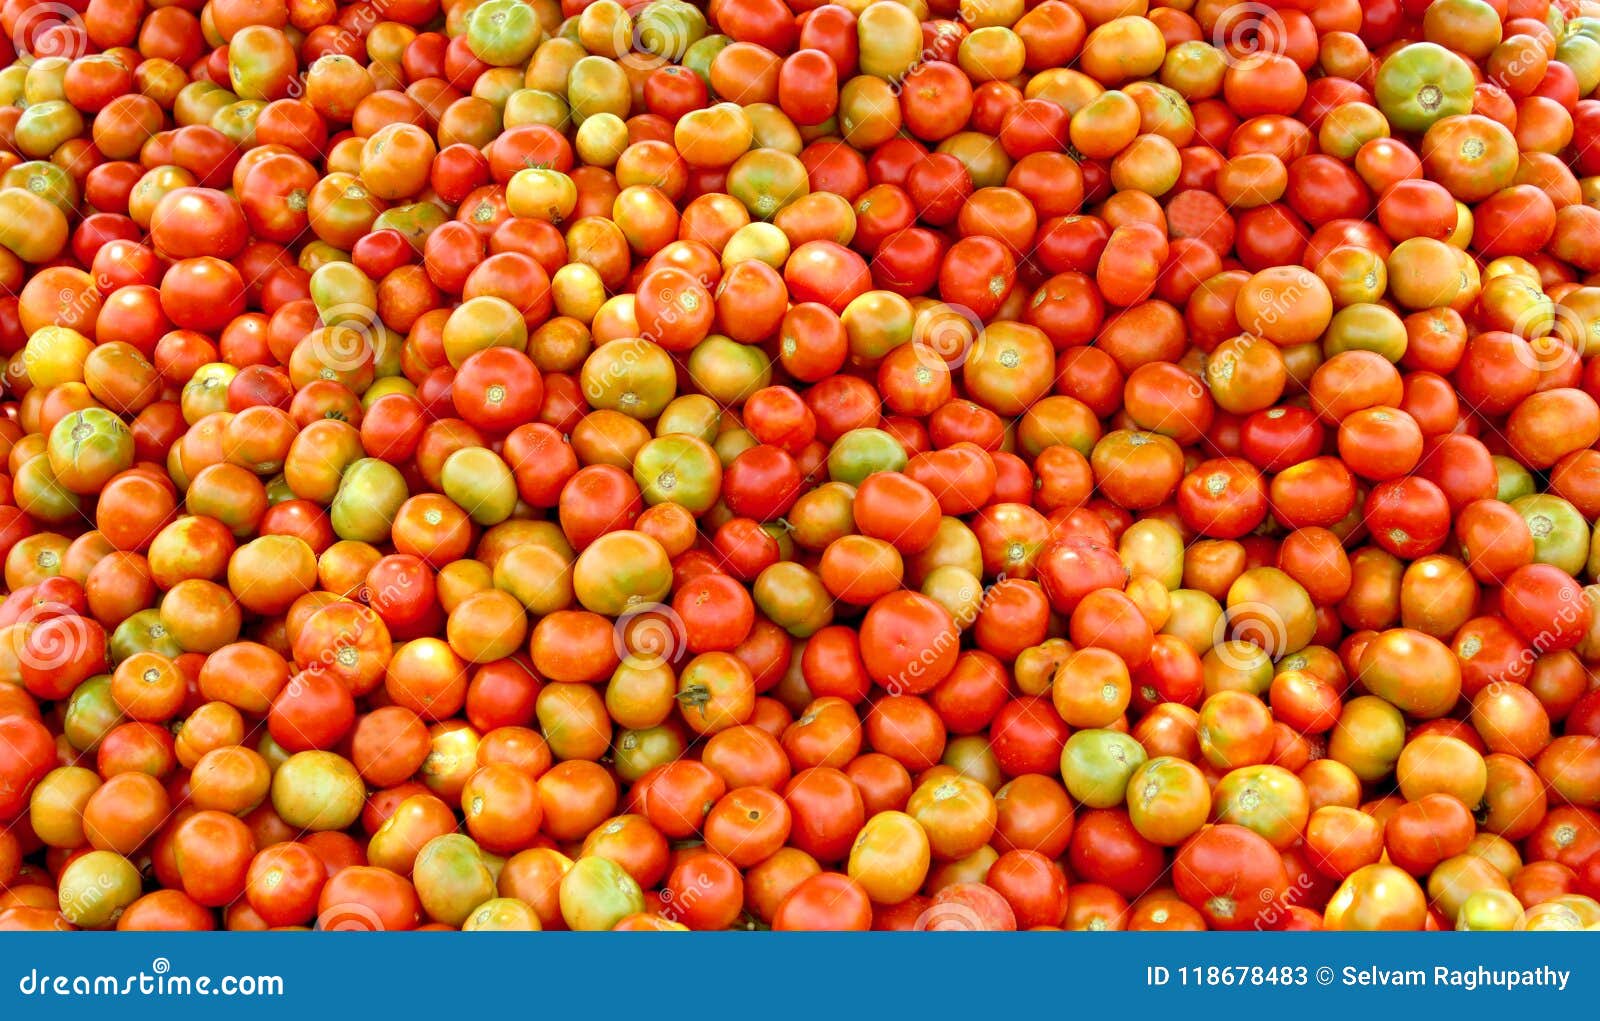 a pile of harvested tomatoes in the field.